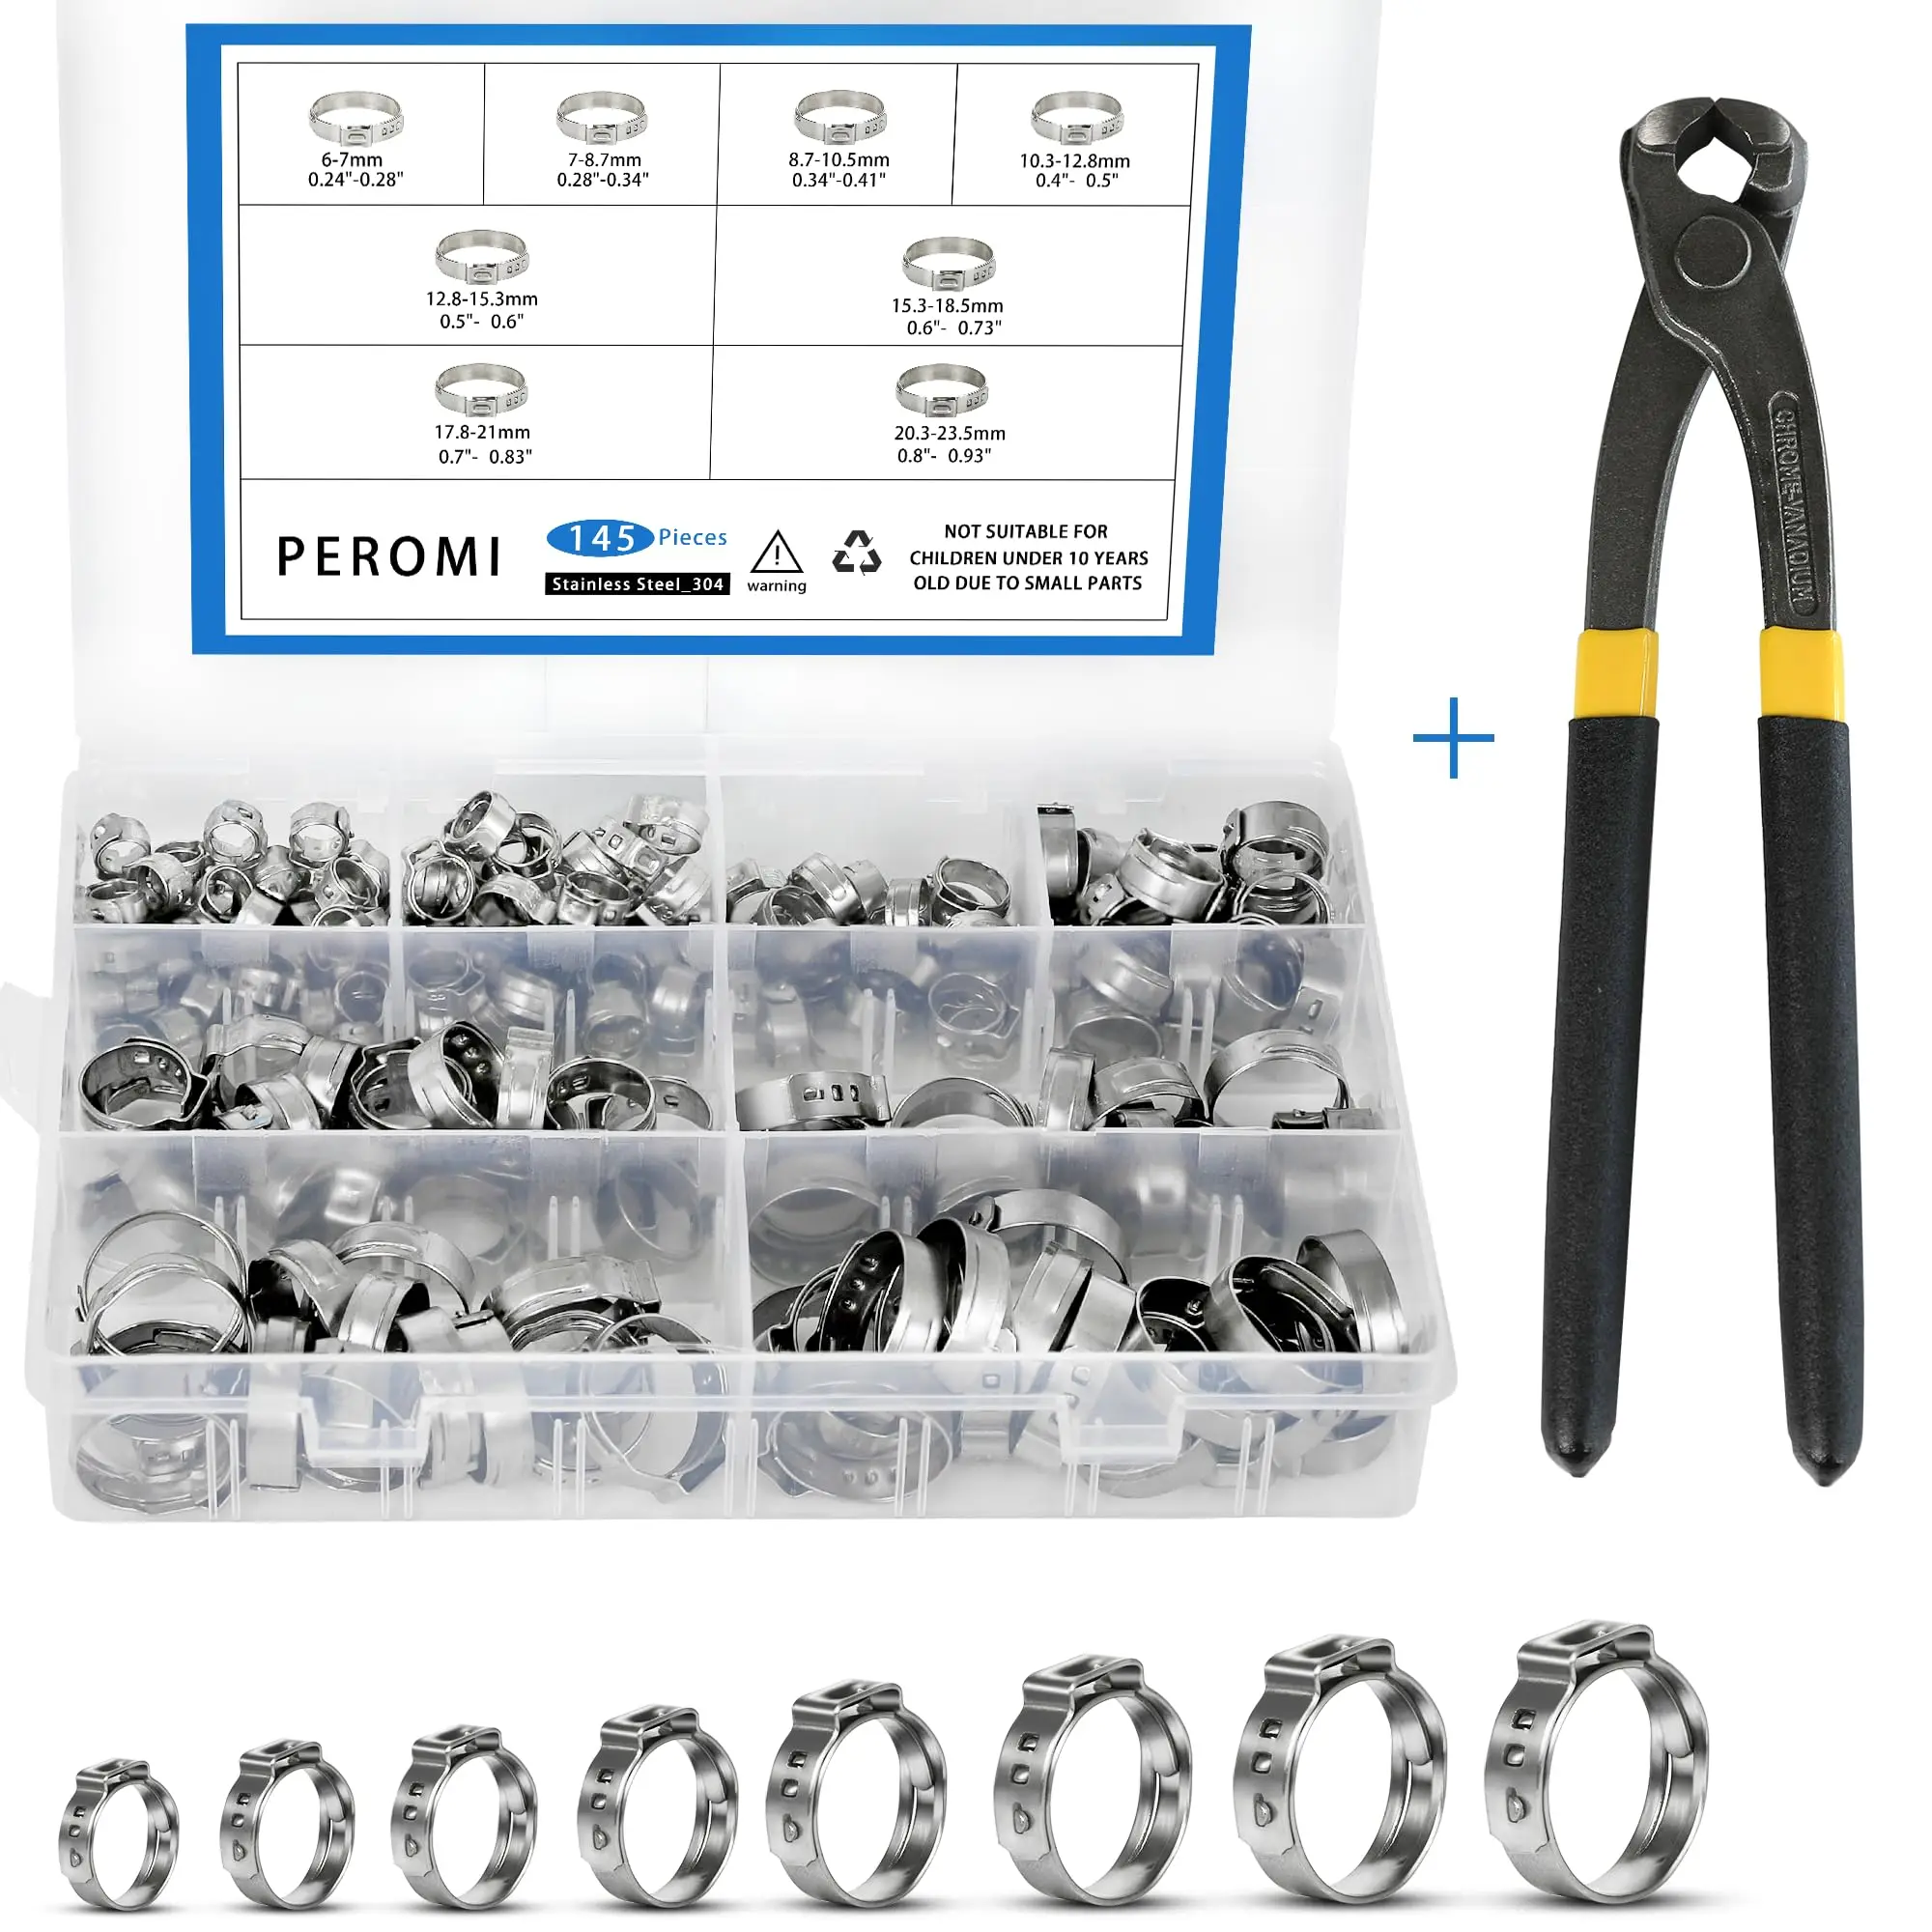 

145pcs Single Ear Stepless Hose Clamps 6-23.5mm 304 Stainless Steel Cinch Clamp Rings Assortment Kit +1PC Hose Clip Clamp Pliers